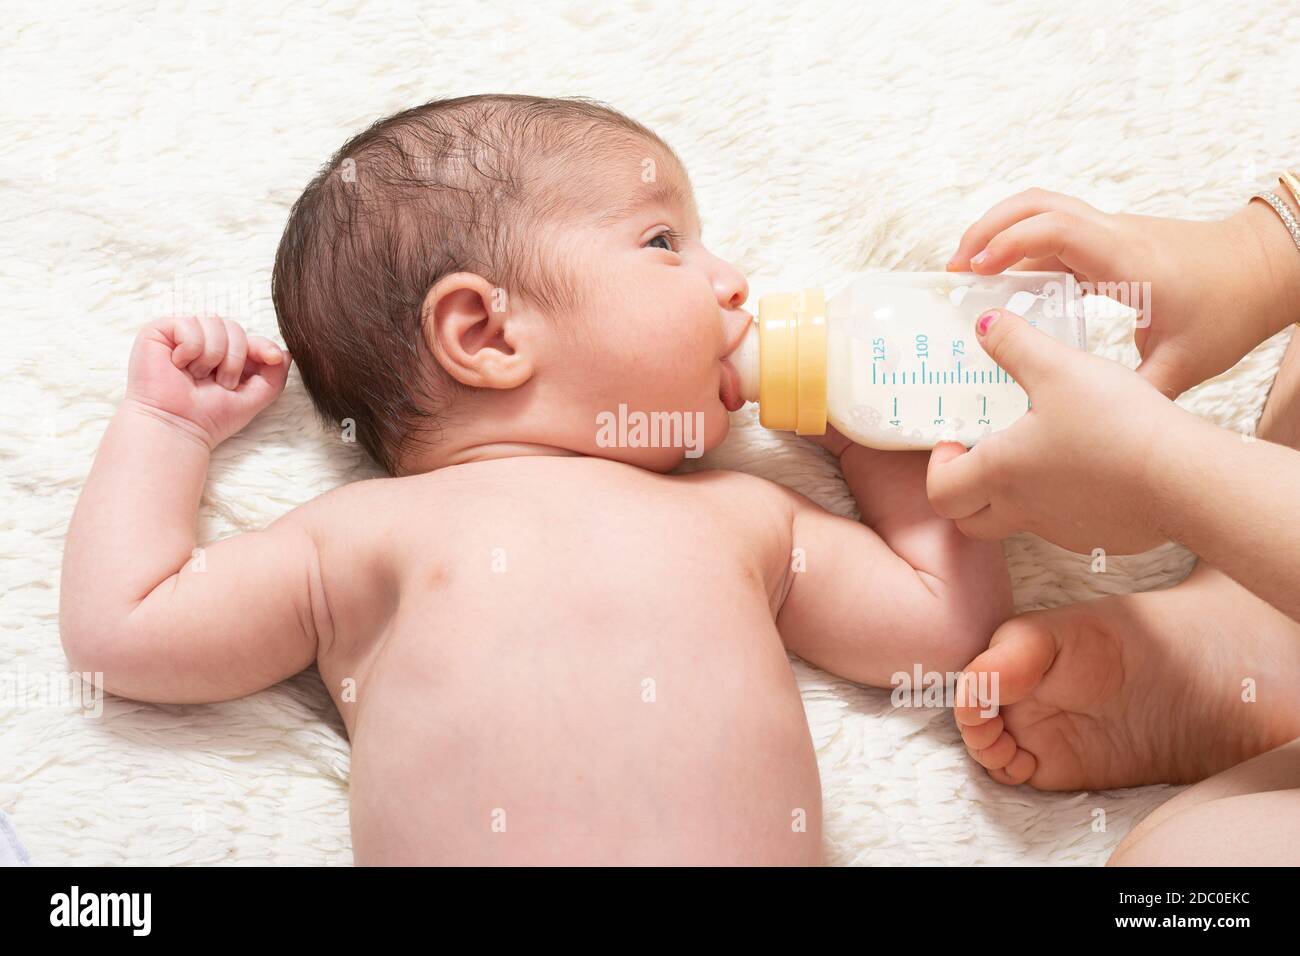 https://c8.alamy.com/comp/2DC0EKC/young-sister-feeding-little-newborn-brother-by-milk-bottle-on-bed-2DC0EKC.jpg